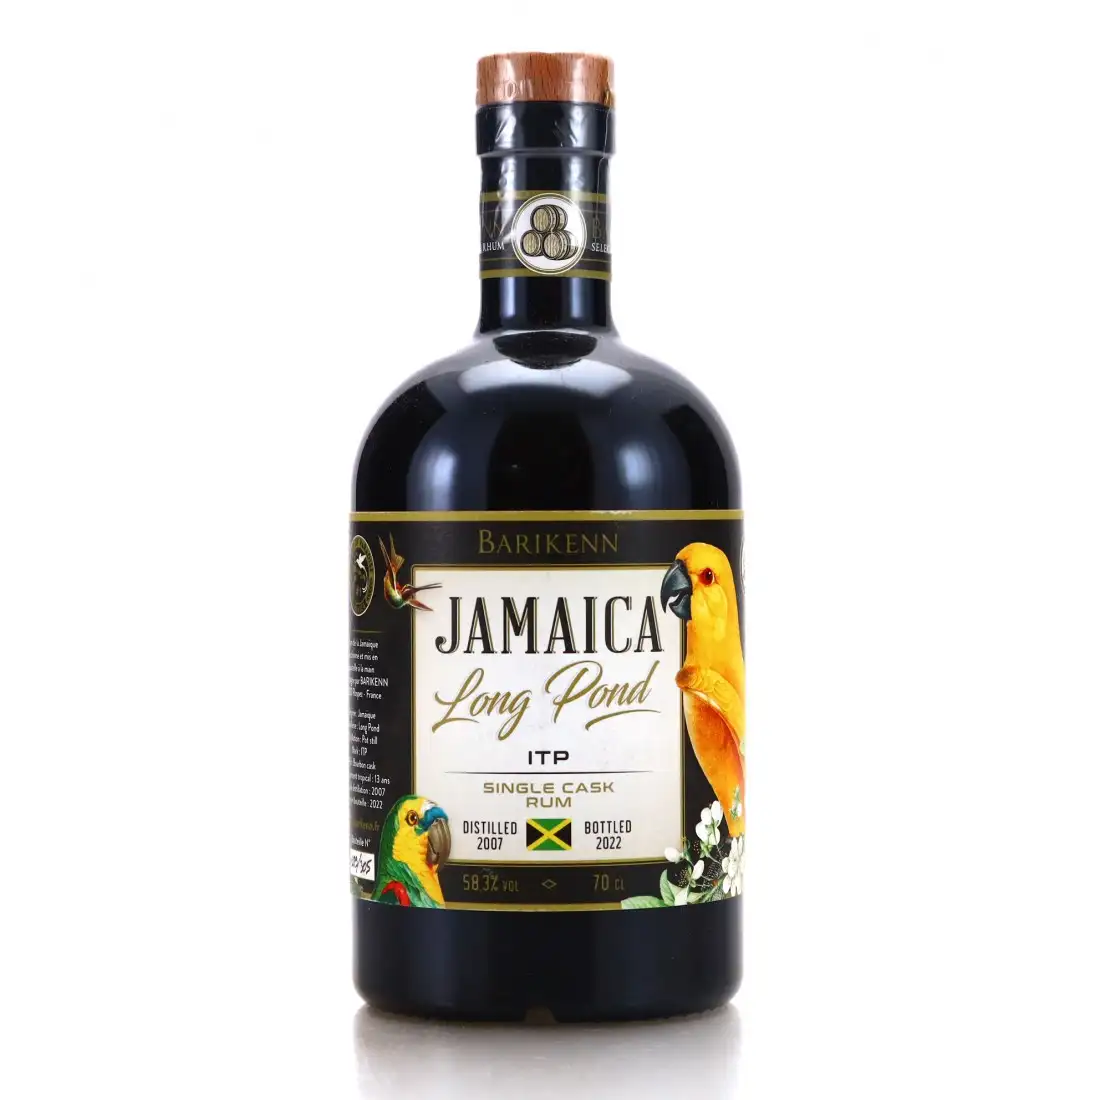 Image of the front of the bottle of the rum Jamaica ITP